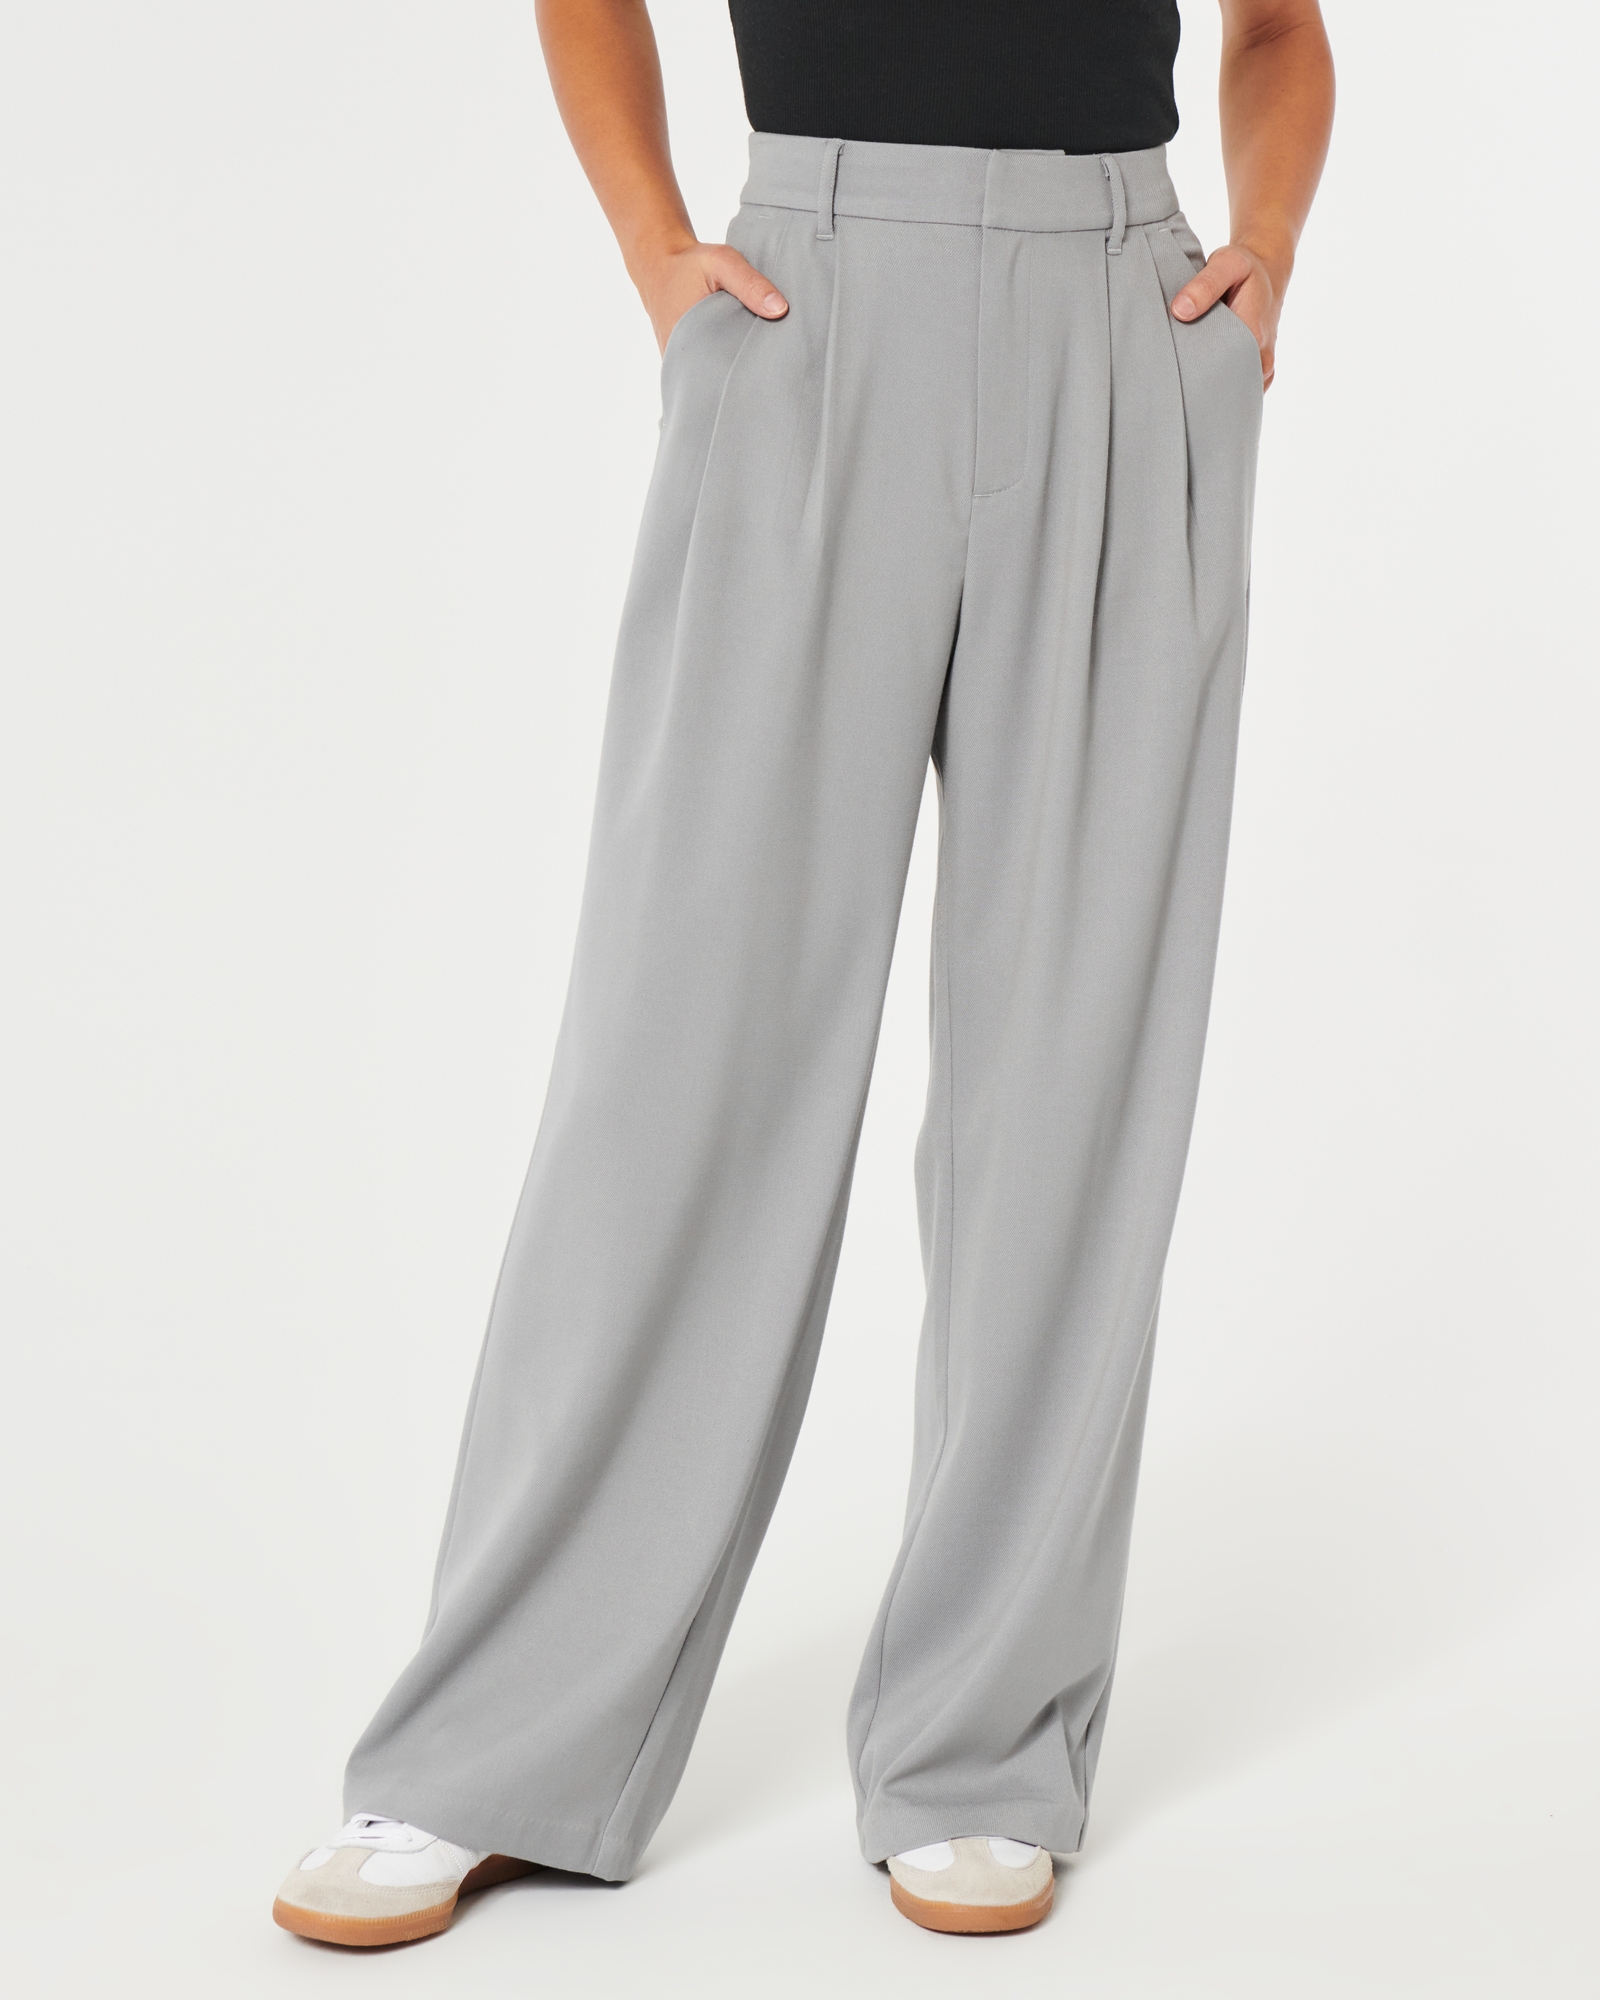 Hollister pants - Women's Clothing & Shoes - Wylie, Texas